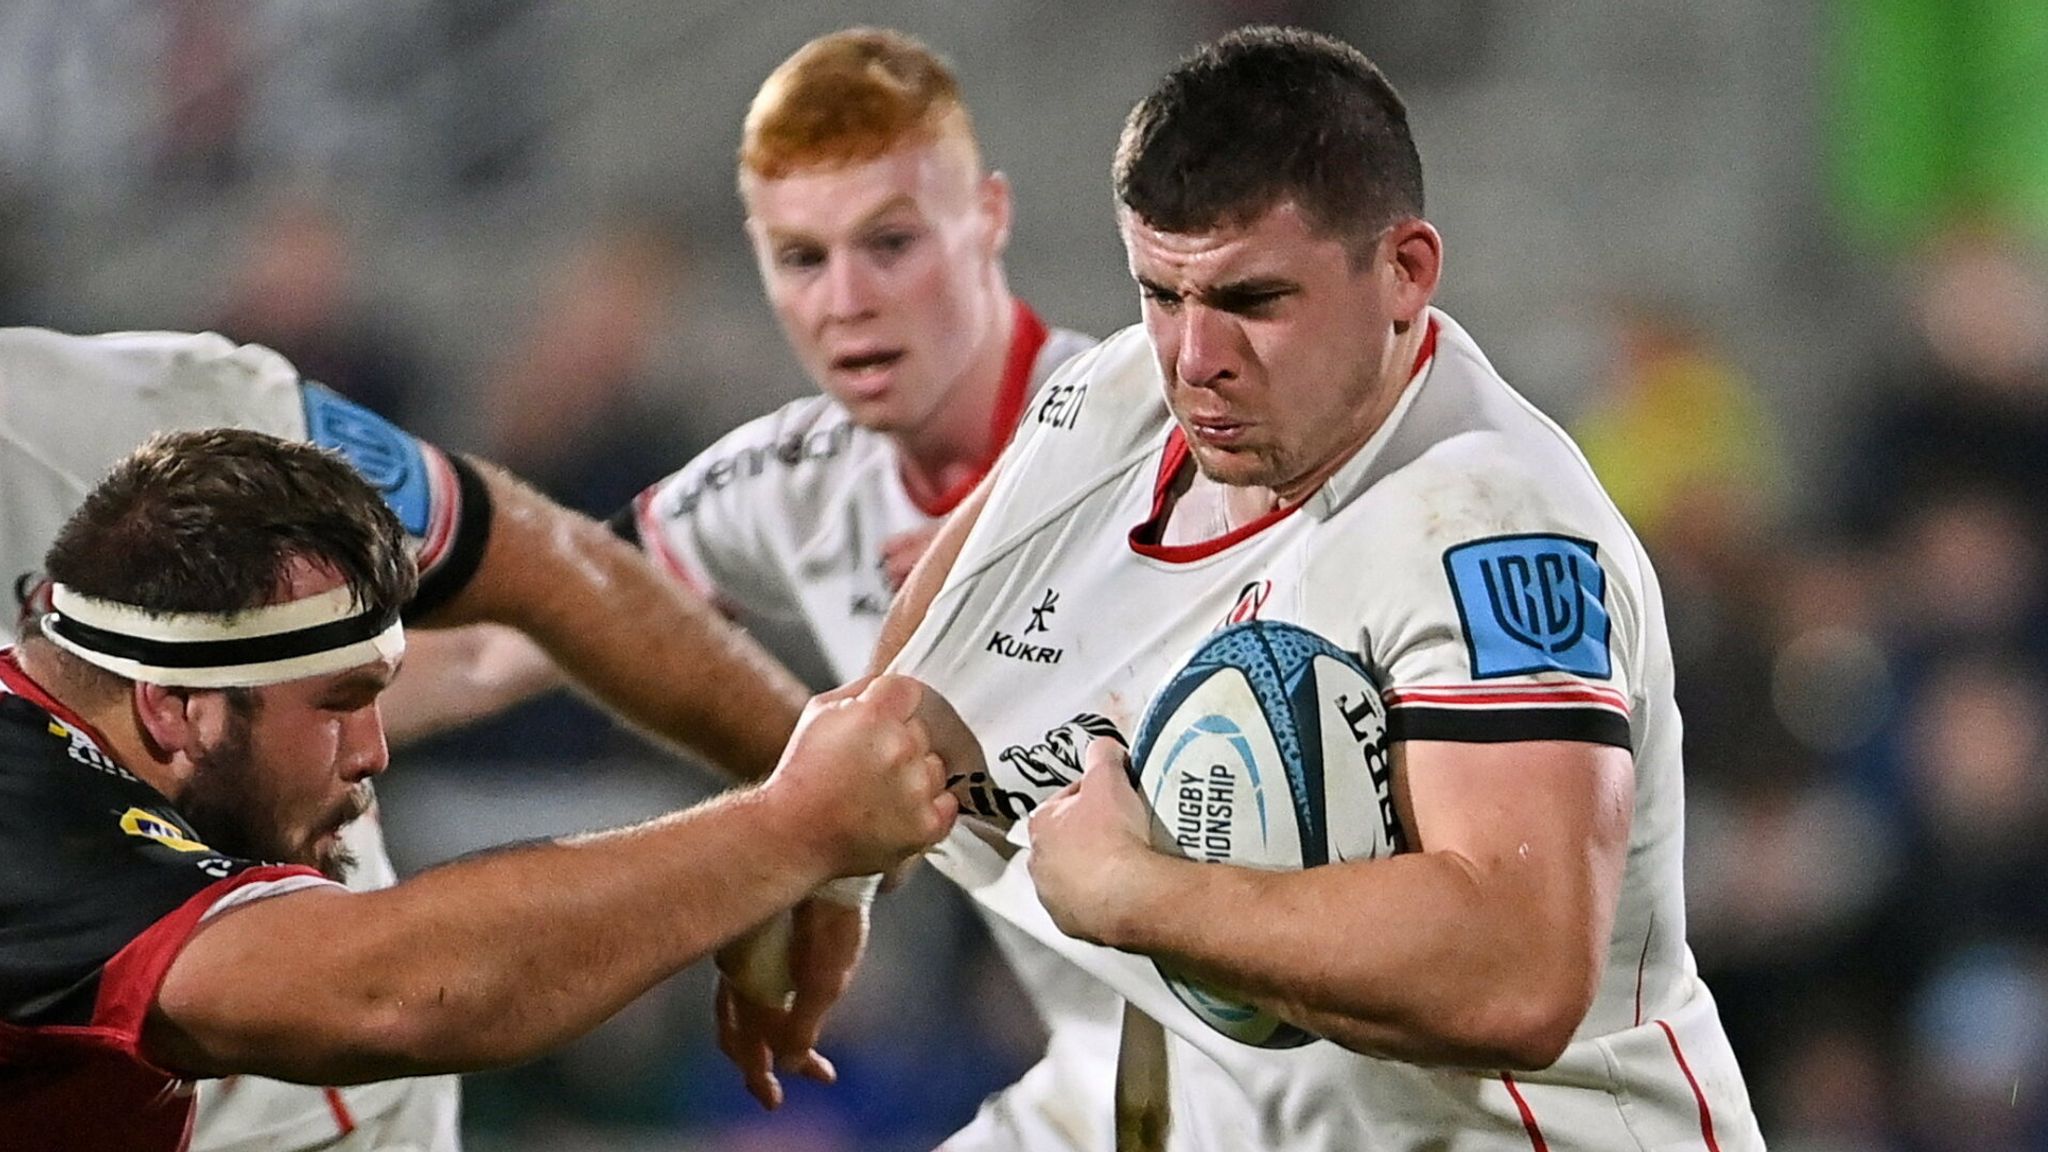 United Rugby Championship Ulster stay unbeaten and Stormers off the mark in Fridays matches Rugby Union News Sky Sports